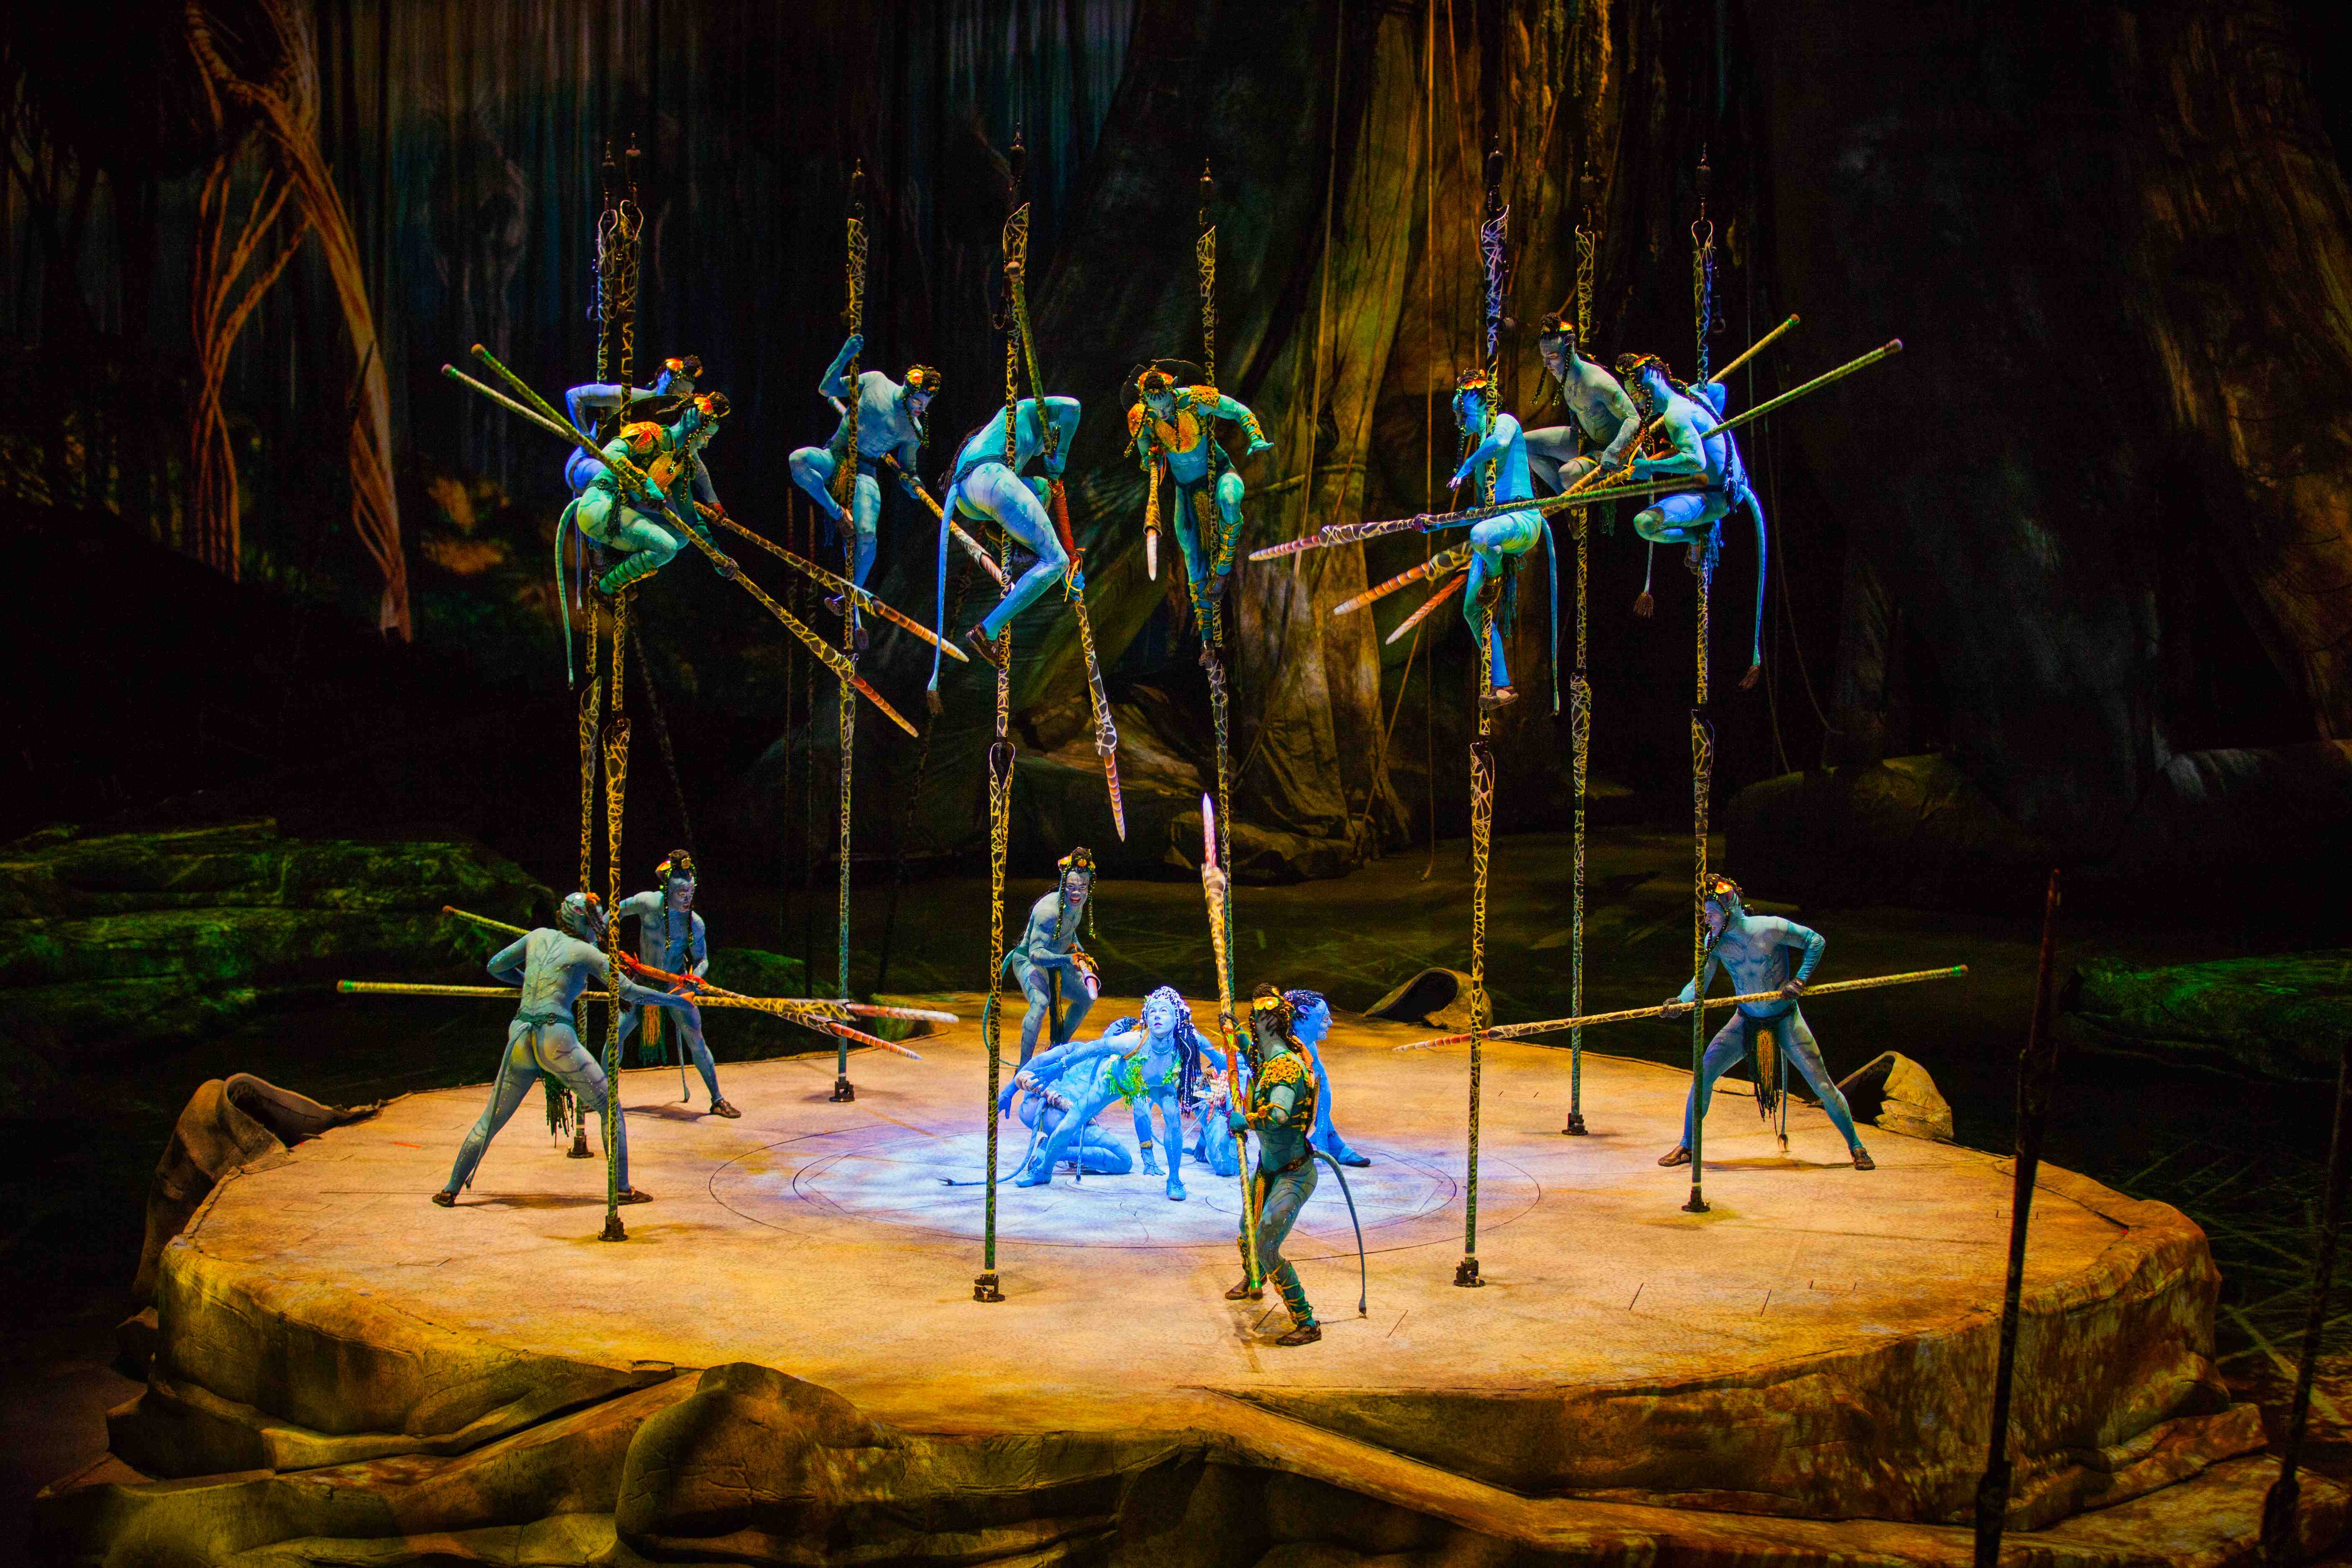 MIA Inside 'The First Flight,' The New Cirque du Soleil Based on 'Avatar'